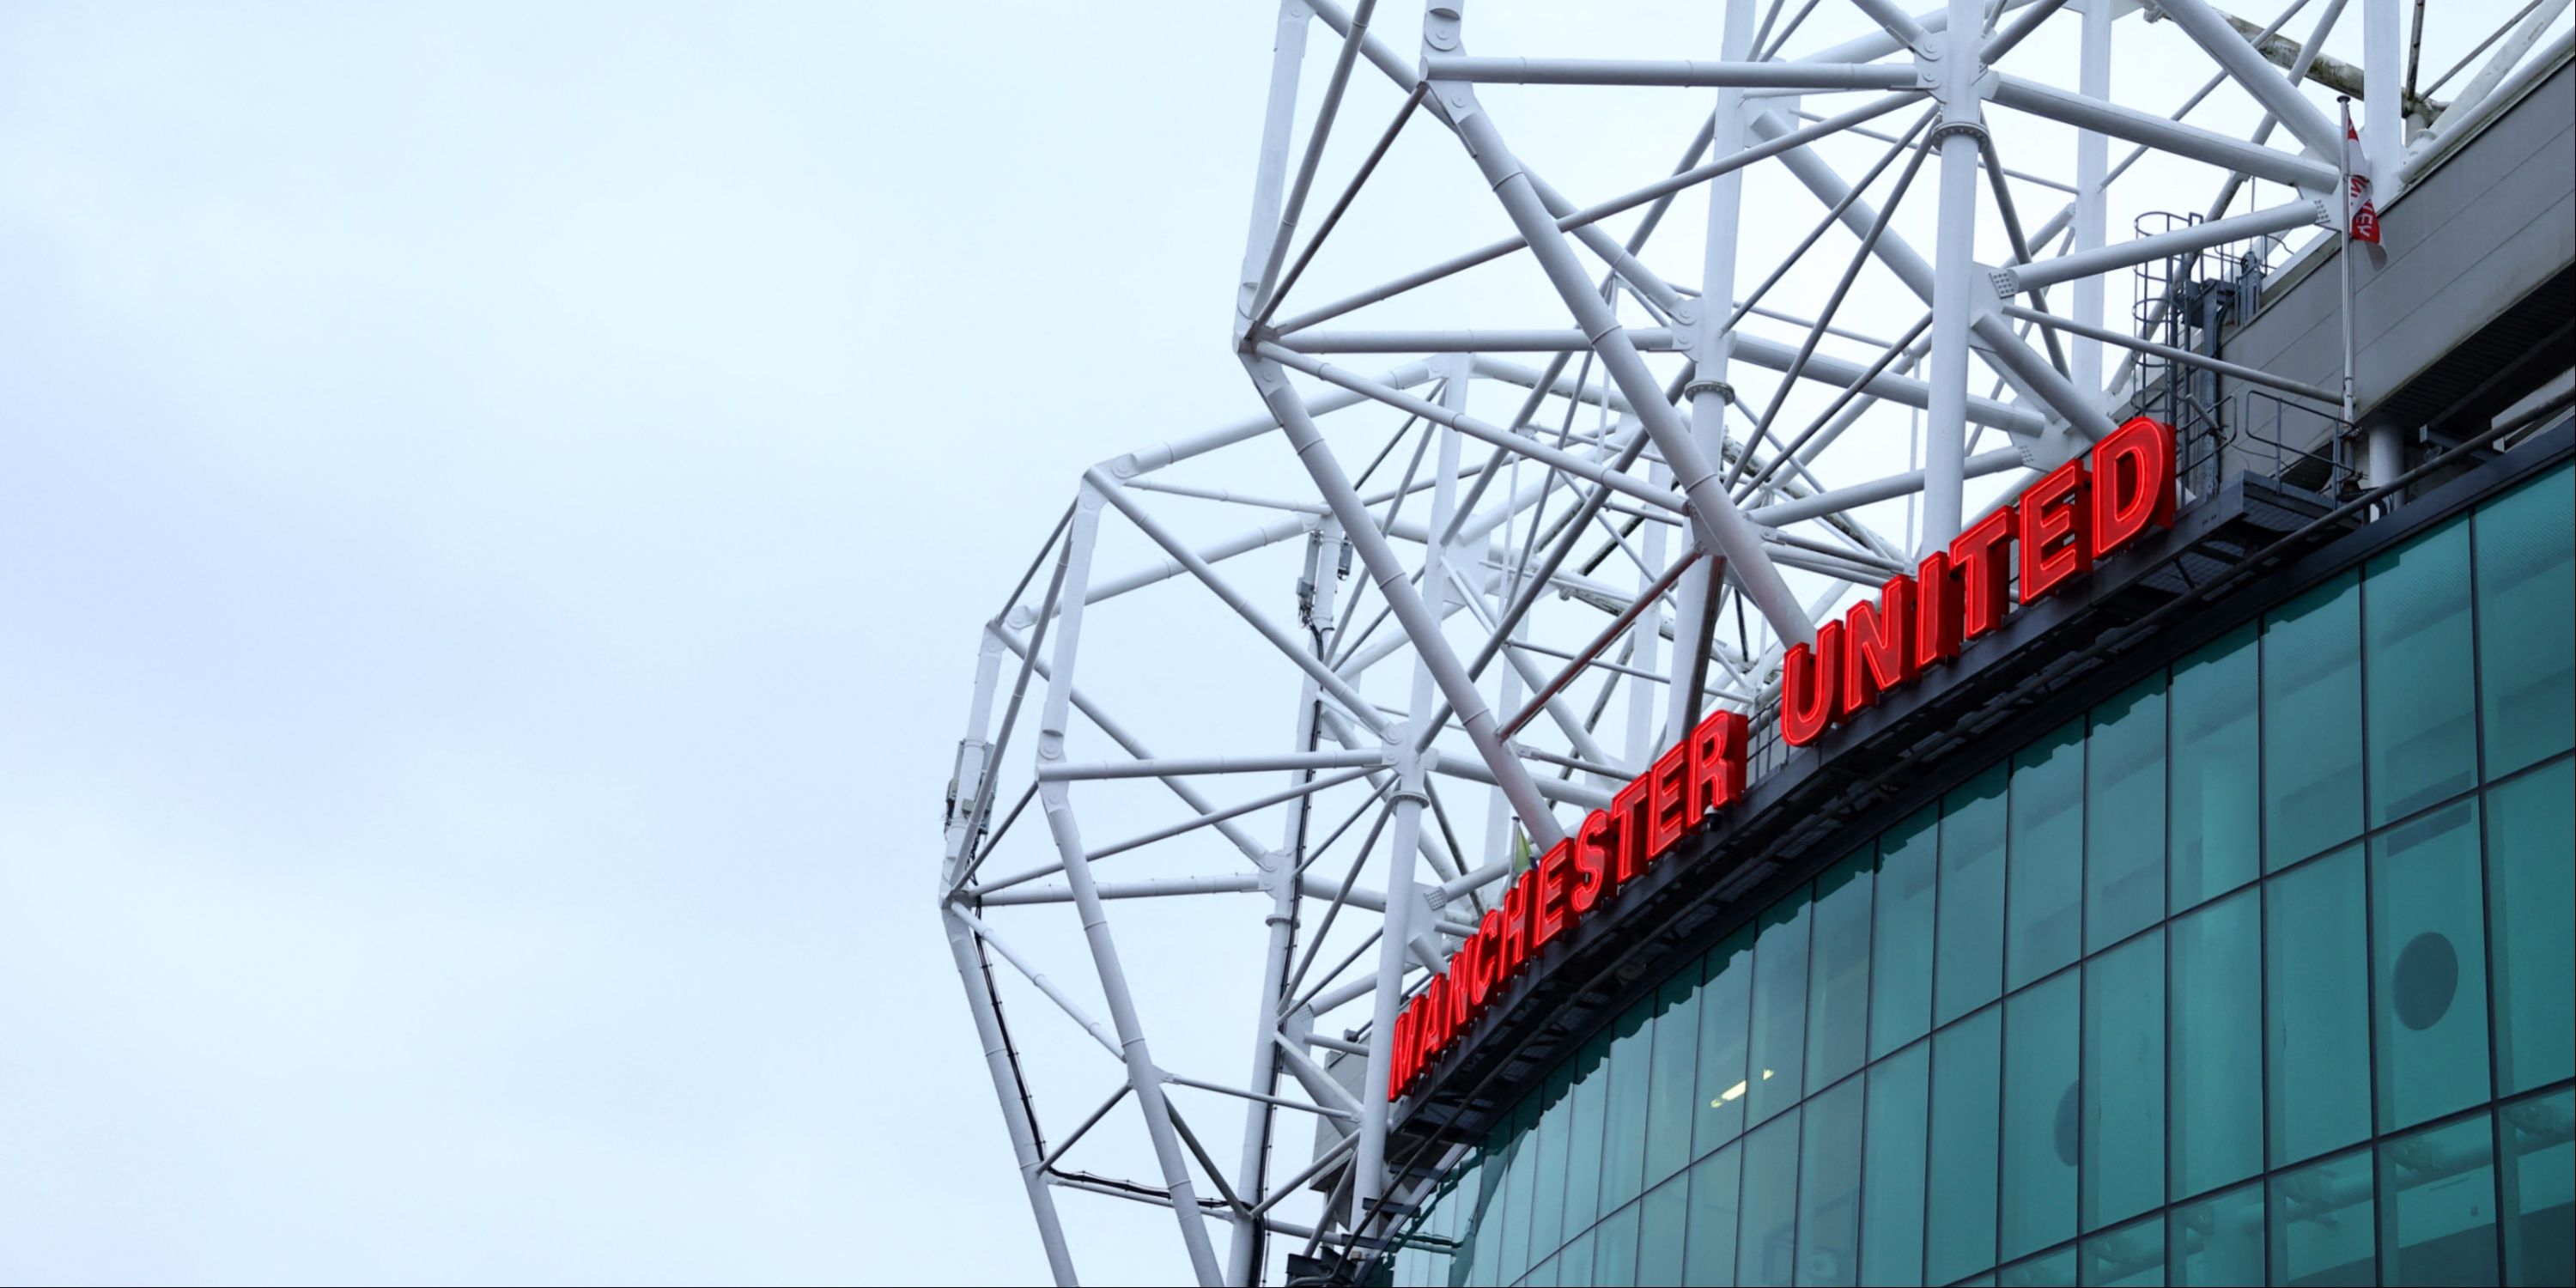 General view of Old Trafford